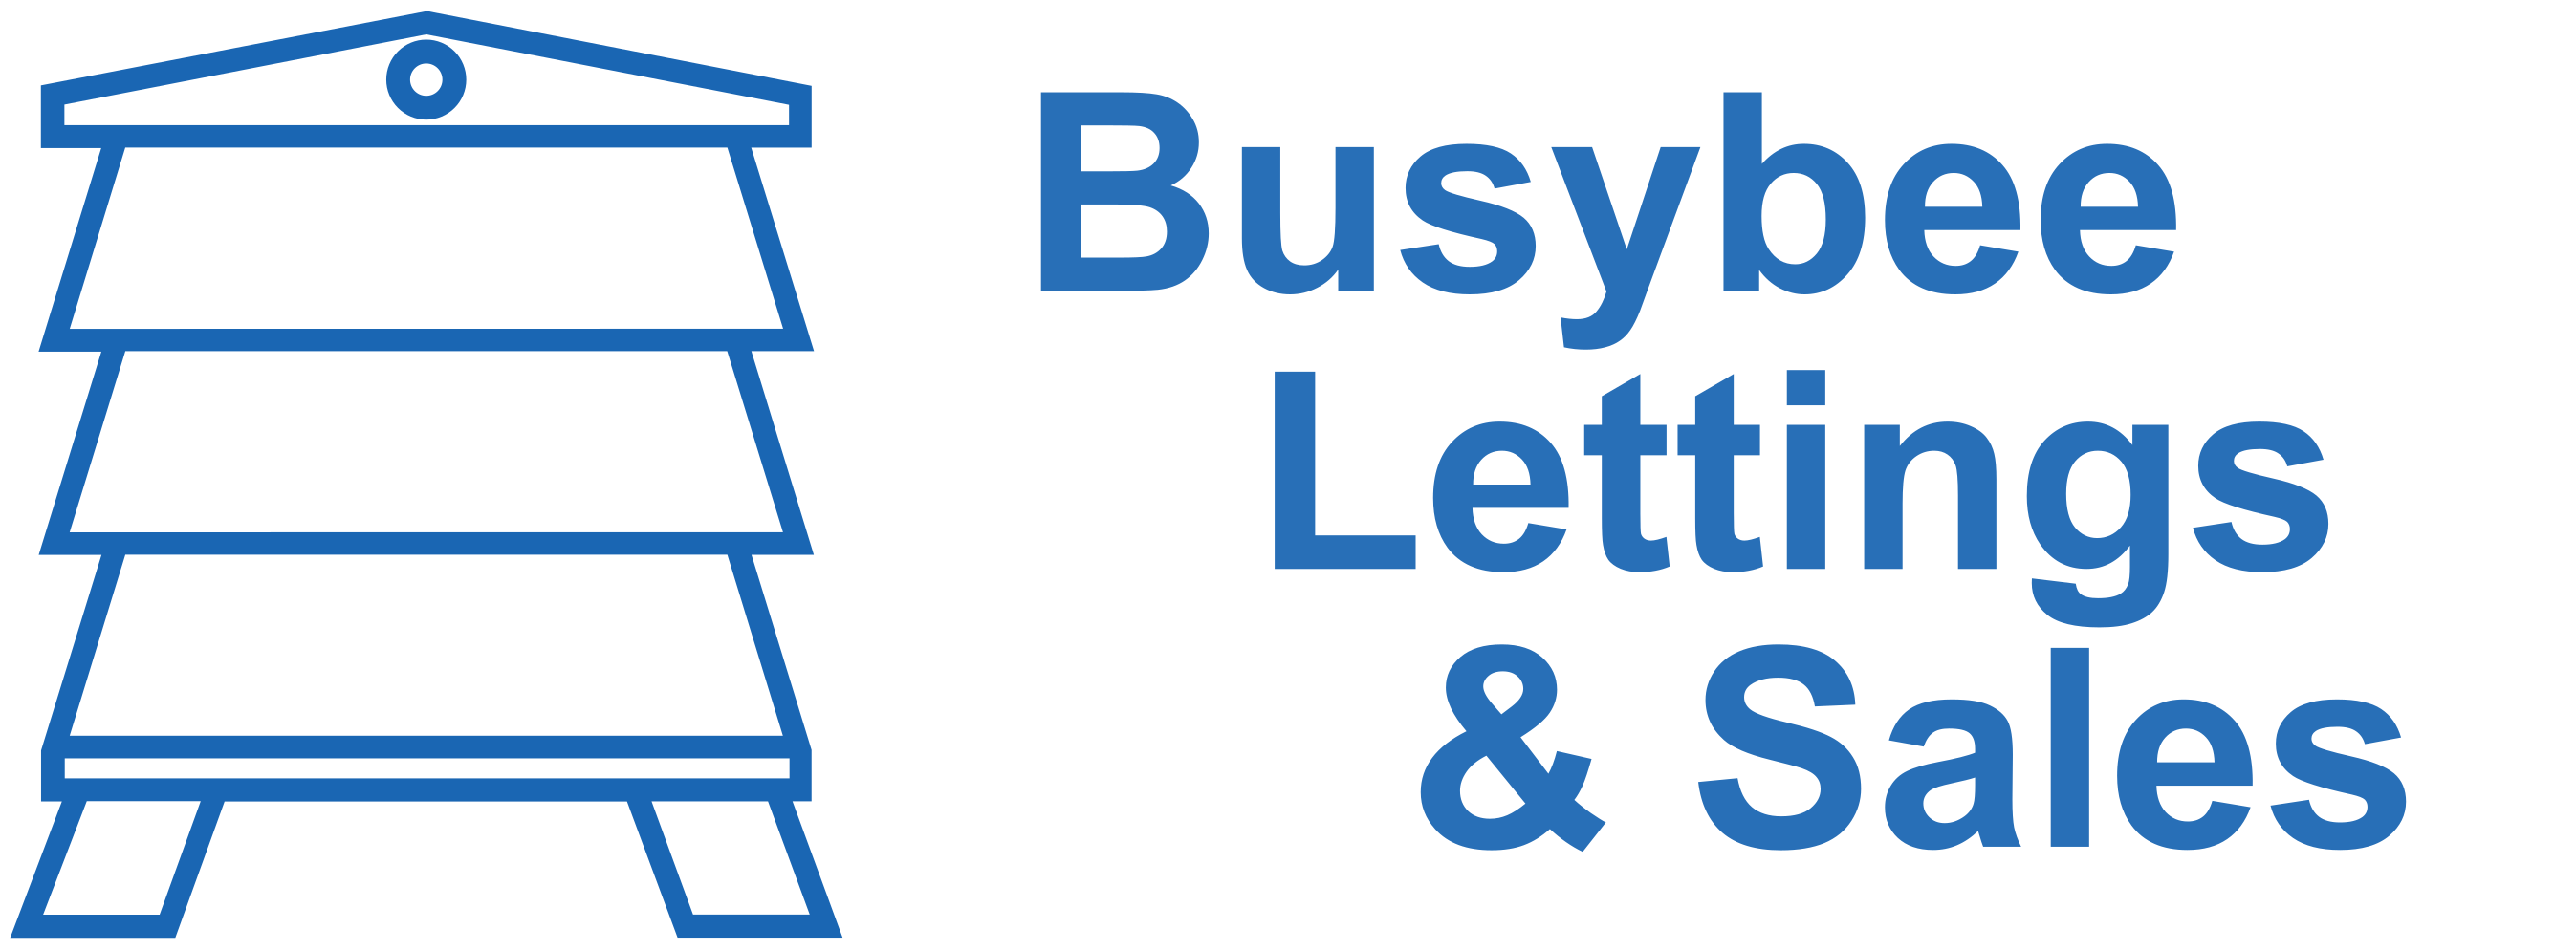 Busybee Lettings & Sales - Street : Letting agents in Sherborne Dorset